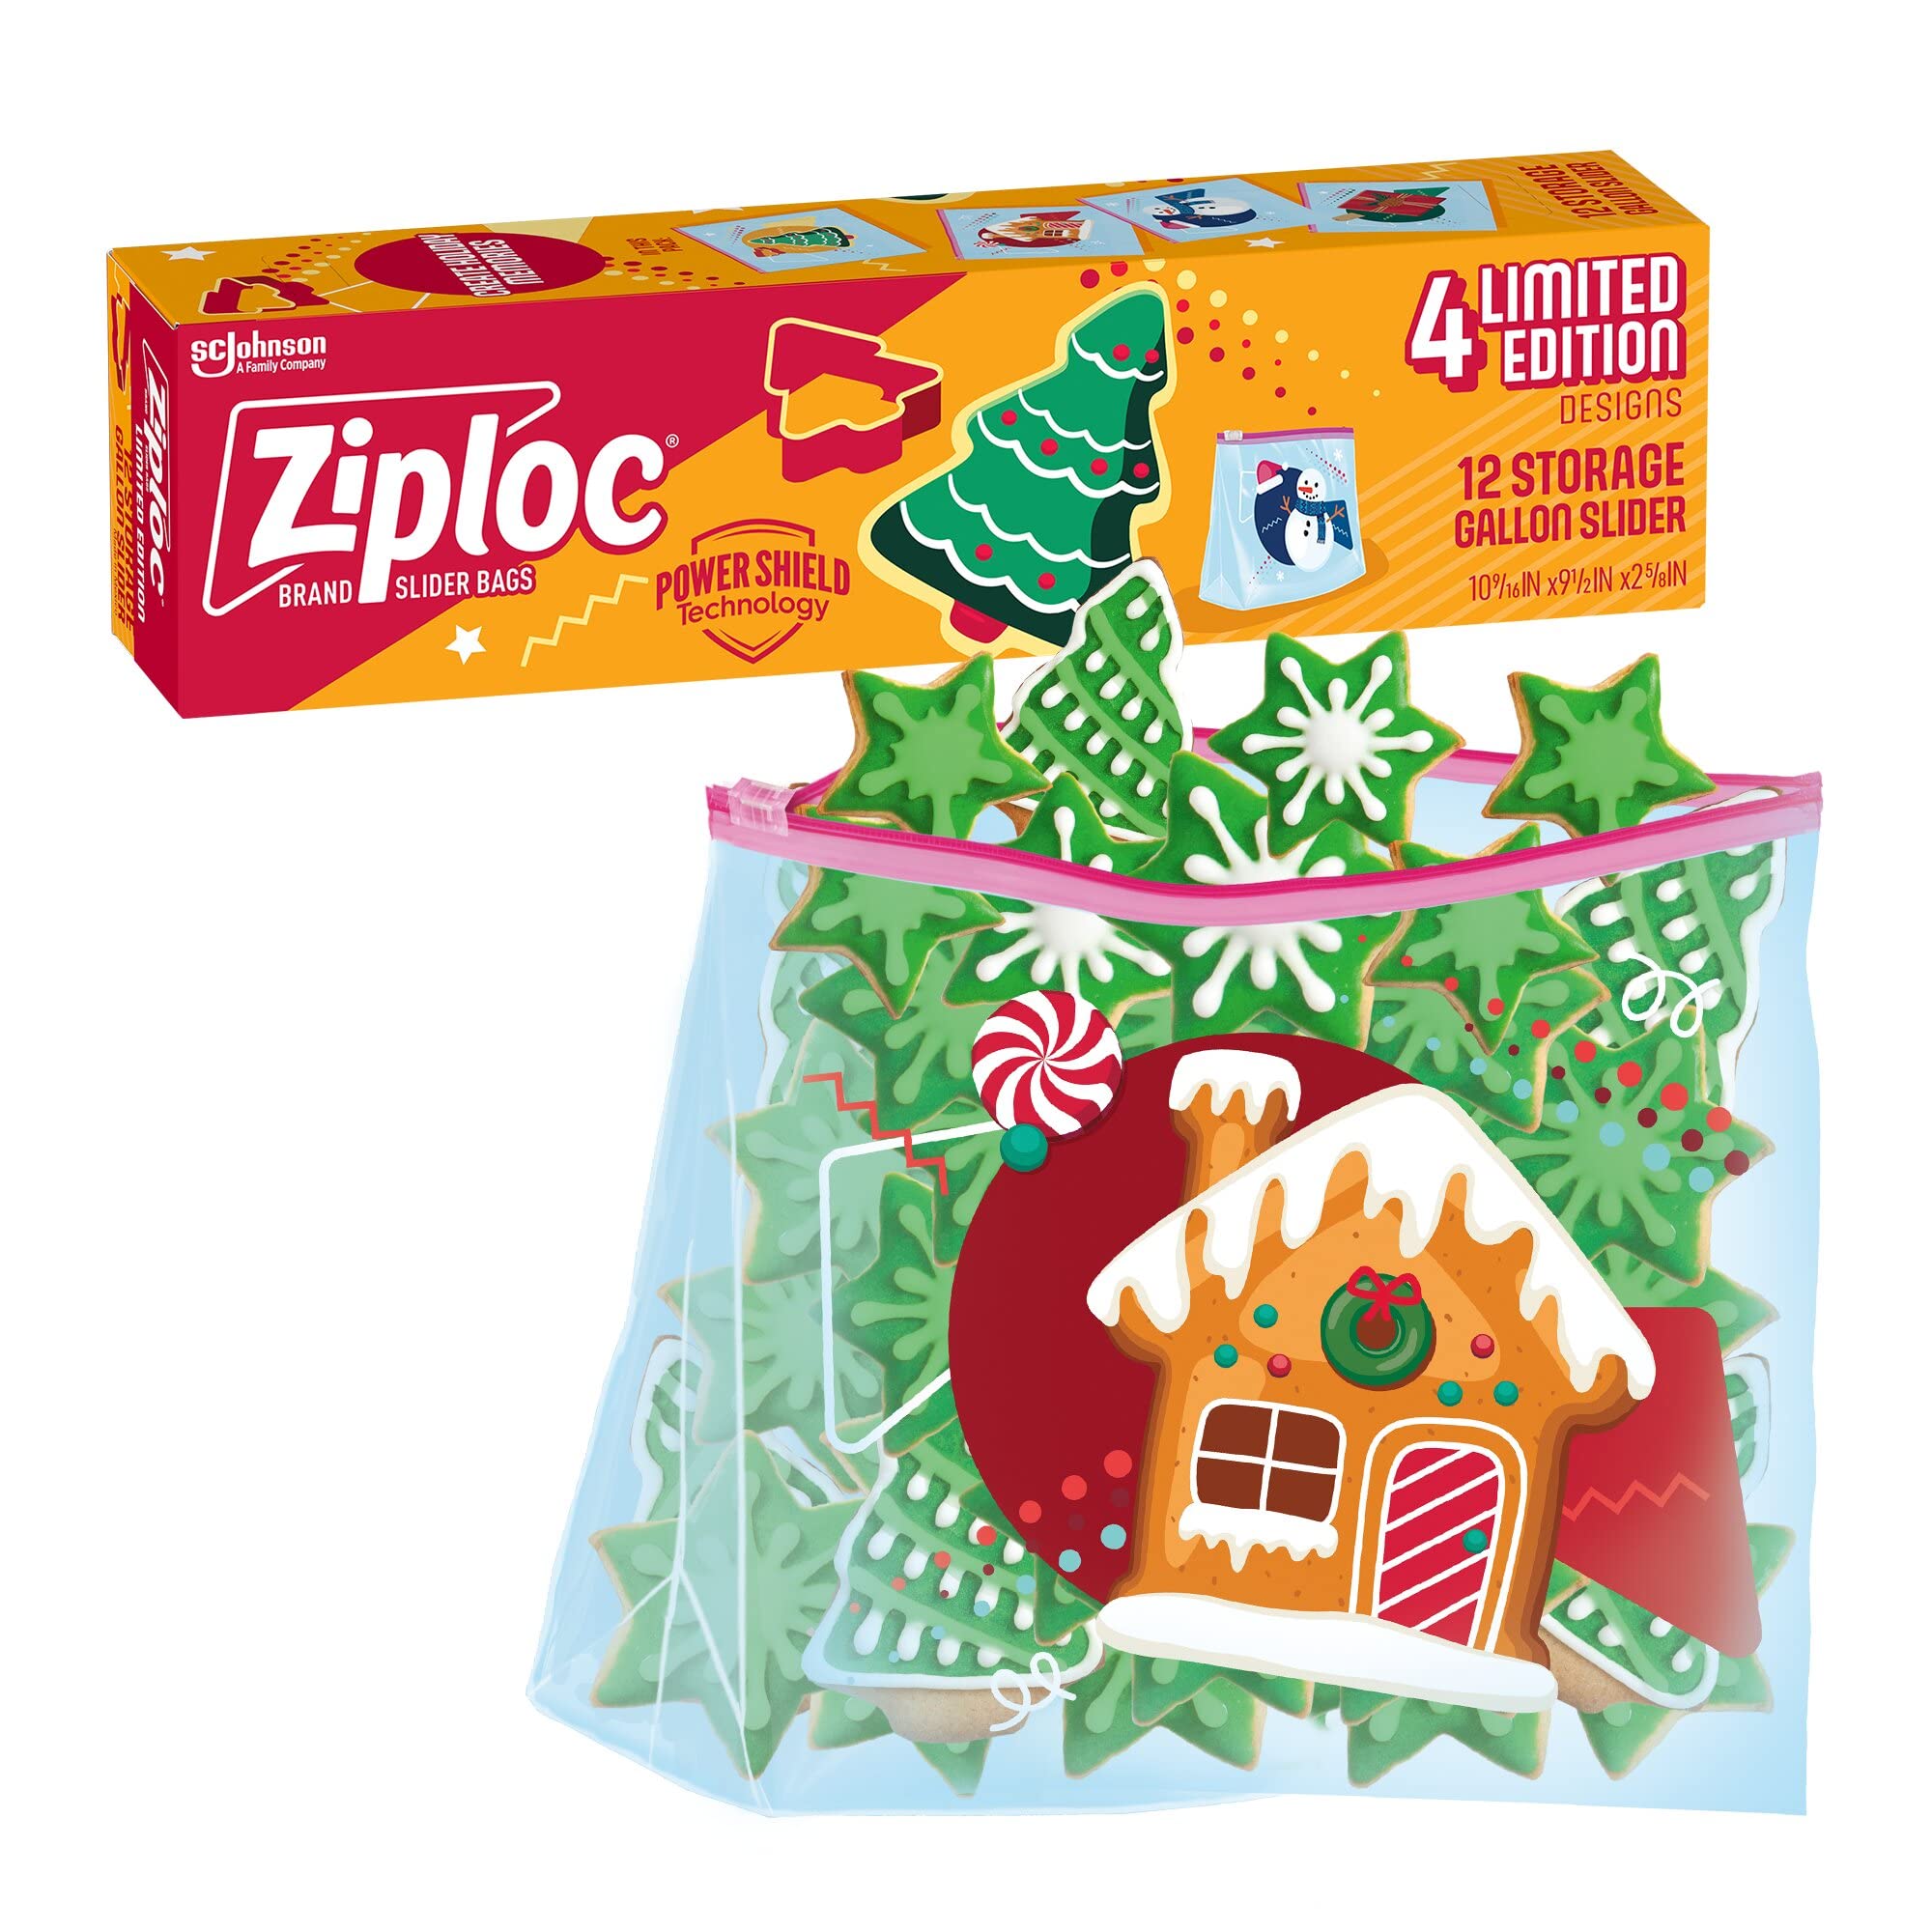  Ziploc Gallon Food Storage Slider Bags, Power Shield Technology  For More Durability, 12 Count, Holiday Designs, Packaging May Vary : Health  & Household